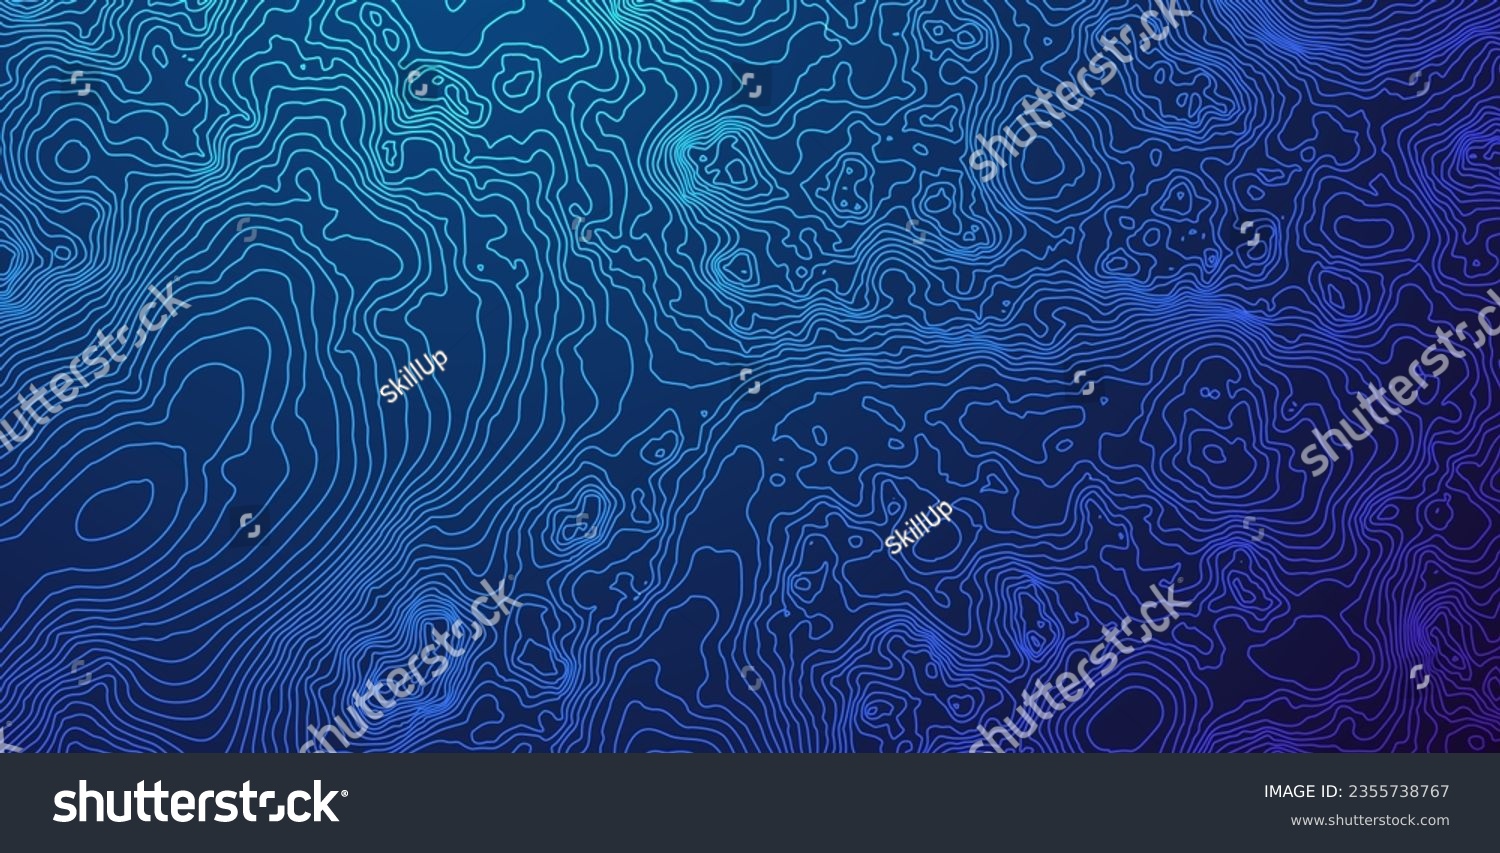 SVG of Sea Ocean Depth Topographic Topo Map Banner Background. Curvy Wavy Lines Vector Illustration. Hills, Rivers and Mountains. Geography Concept. svg